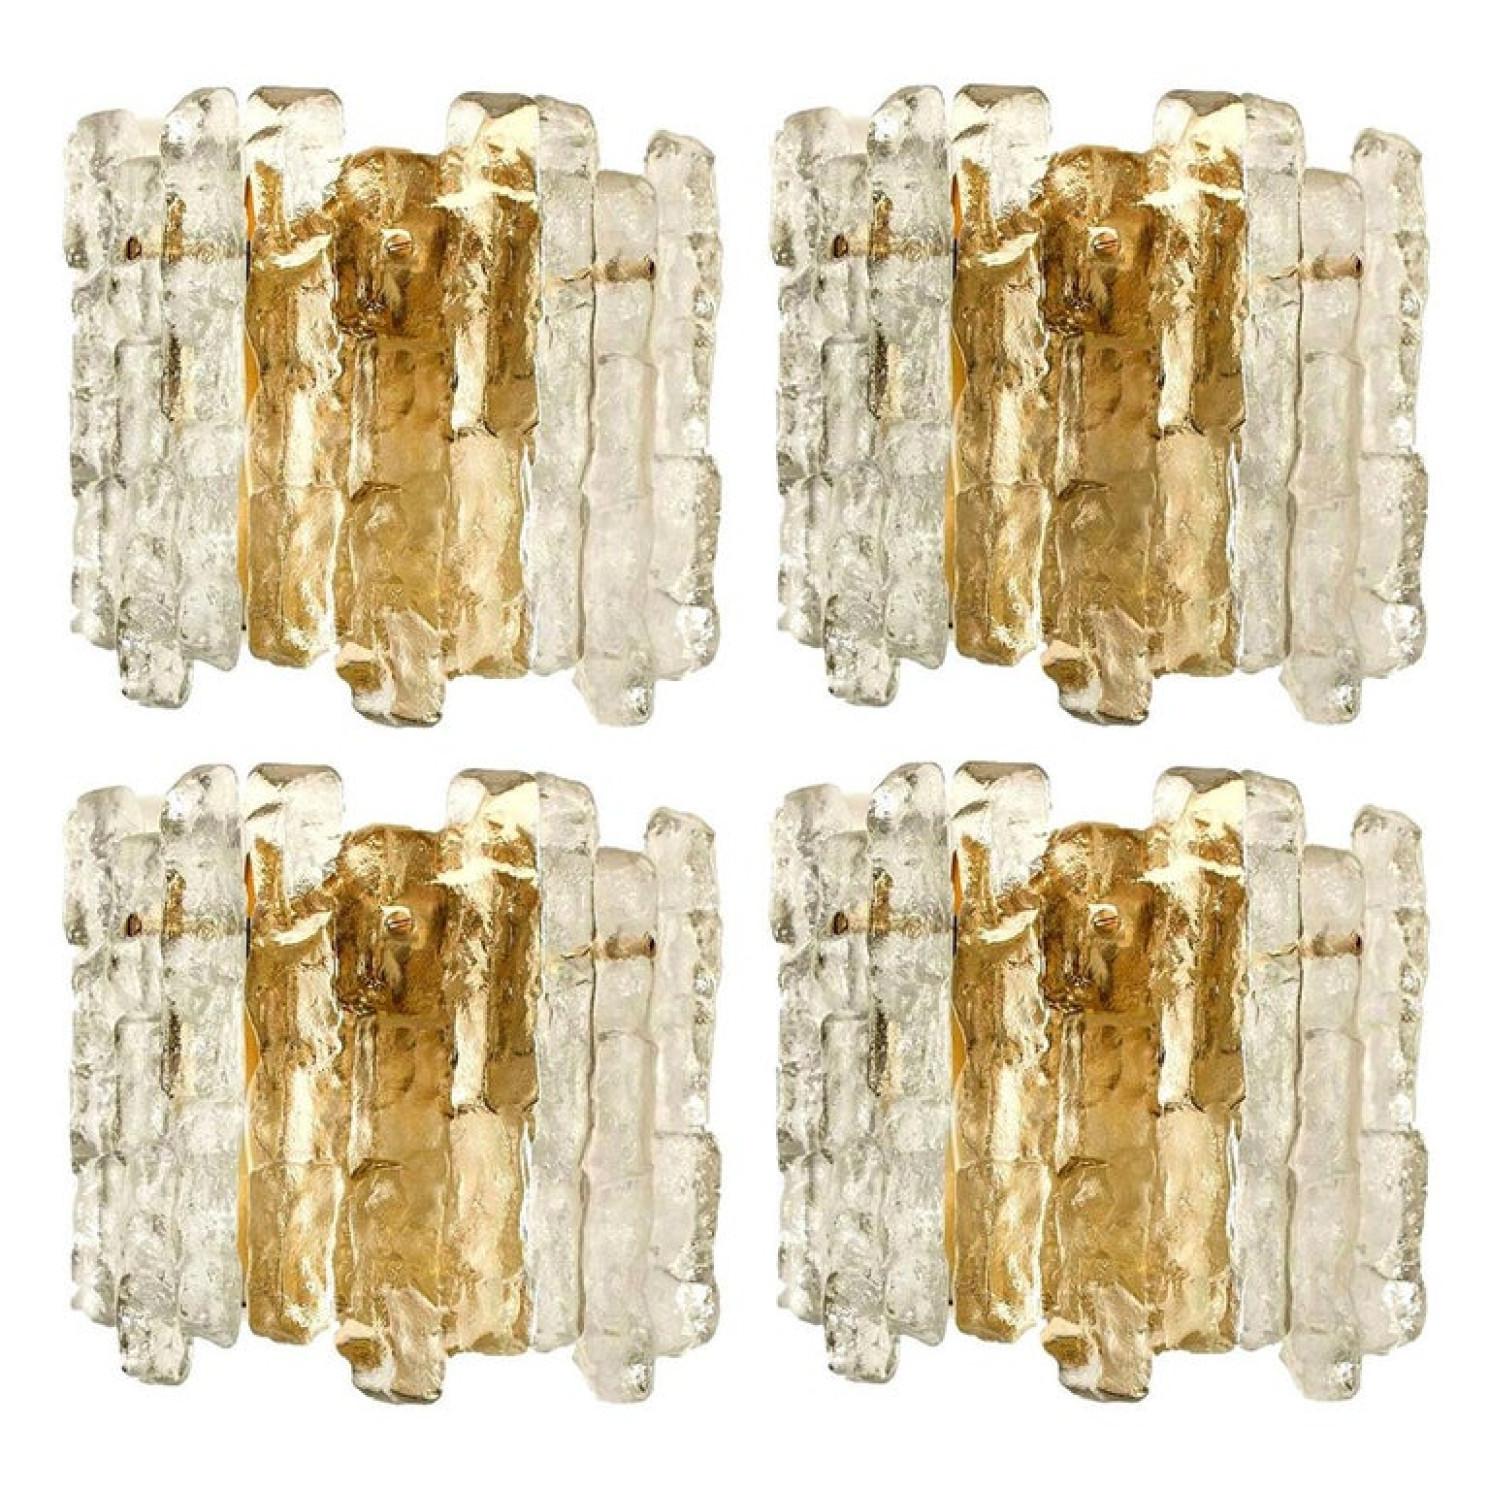 1 of the 6 beautiful and elegant modern brass toned wall lights or sconces, manufactured by J.T. Kalmar Austria in the 1970s. Lovely design, executed to a very high standard.

Each wall light has three solid ice glass sheets dangling on it. Clean